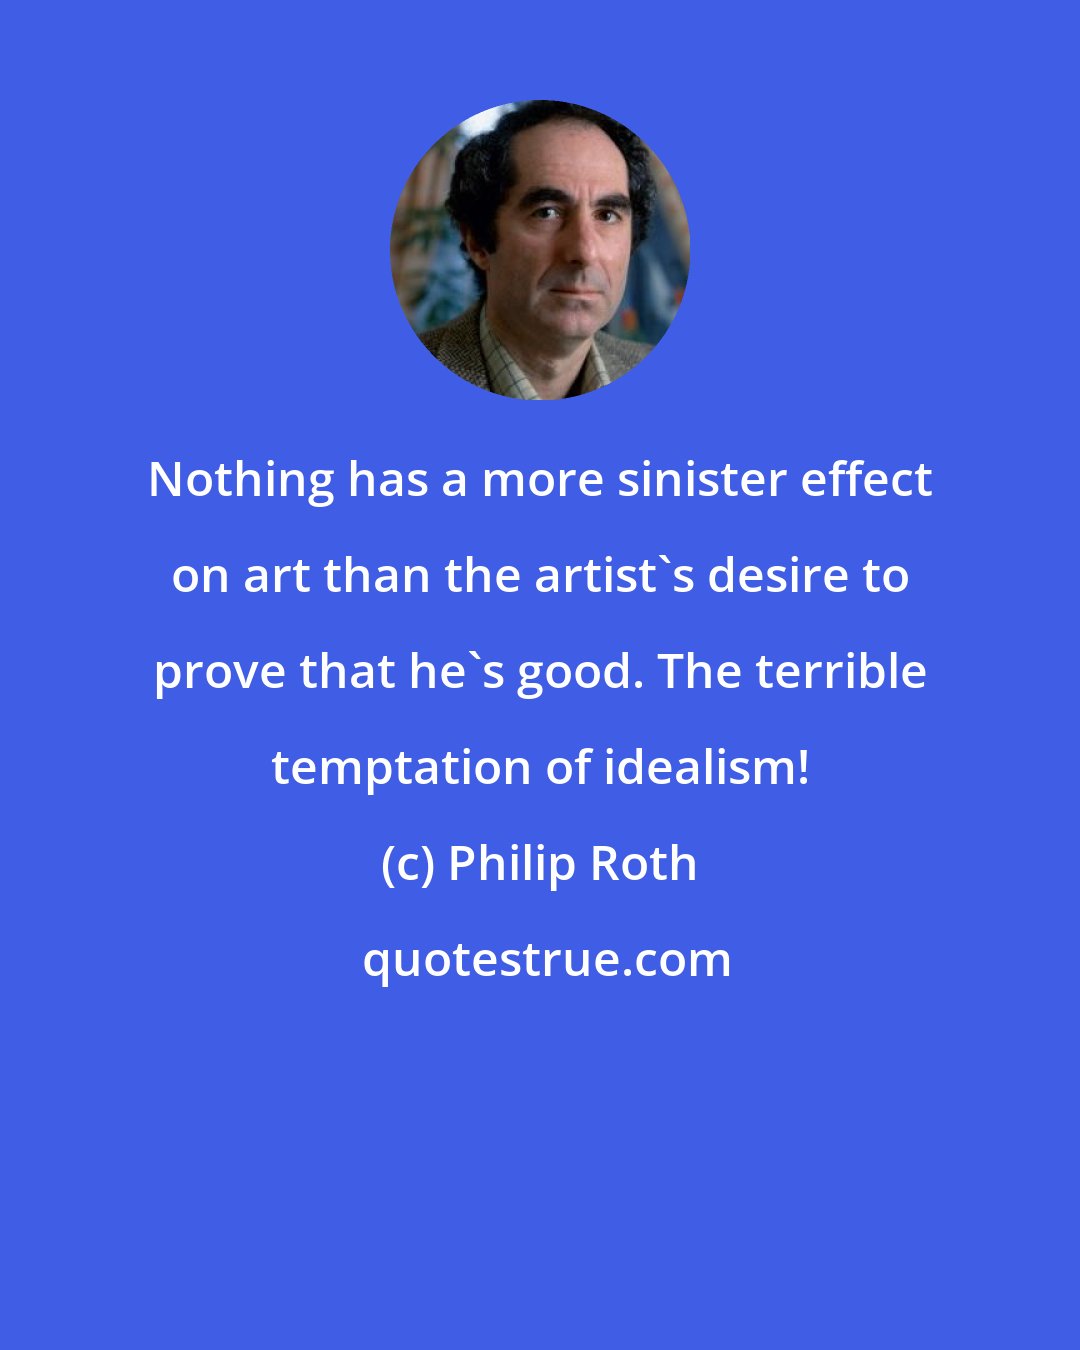 Philip Roth: Nothing has a more sinister effect on art than the artist's desire to prove that he's good. The terrible temptation of idealism!